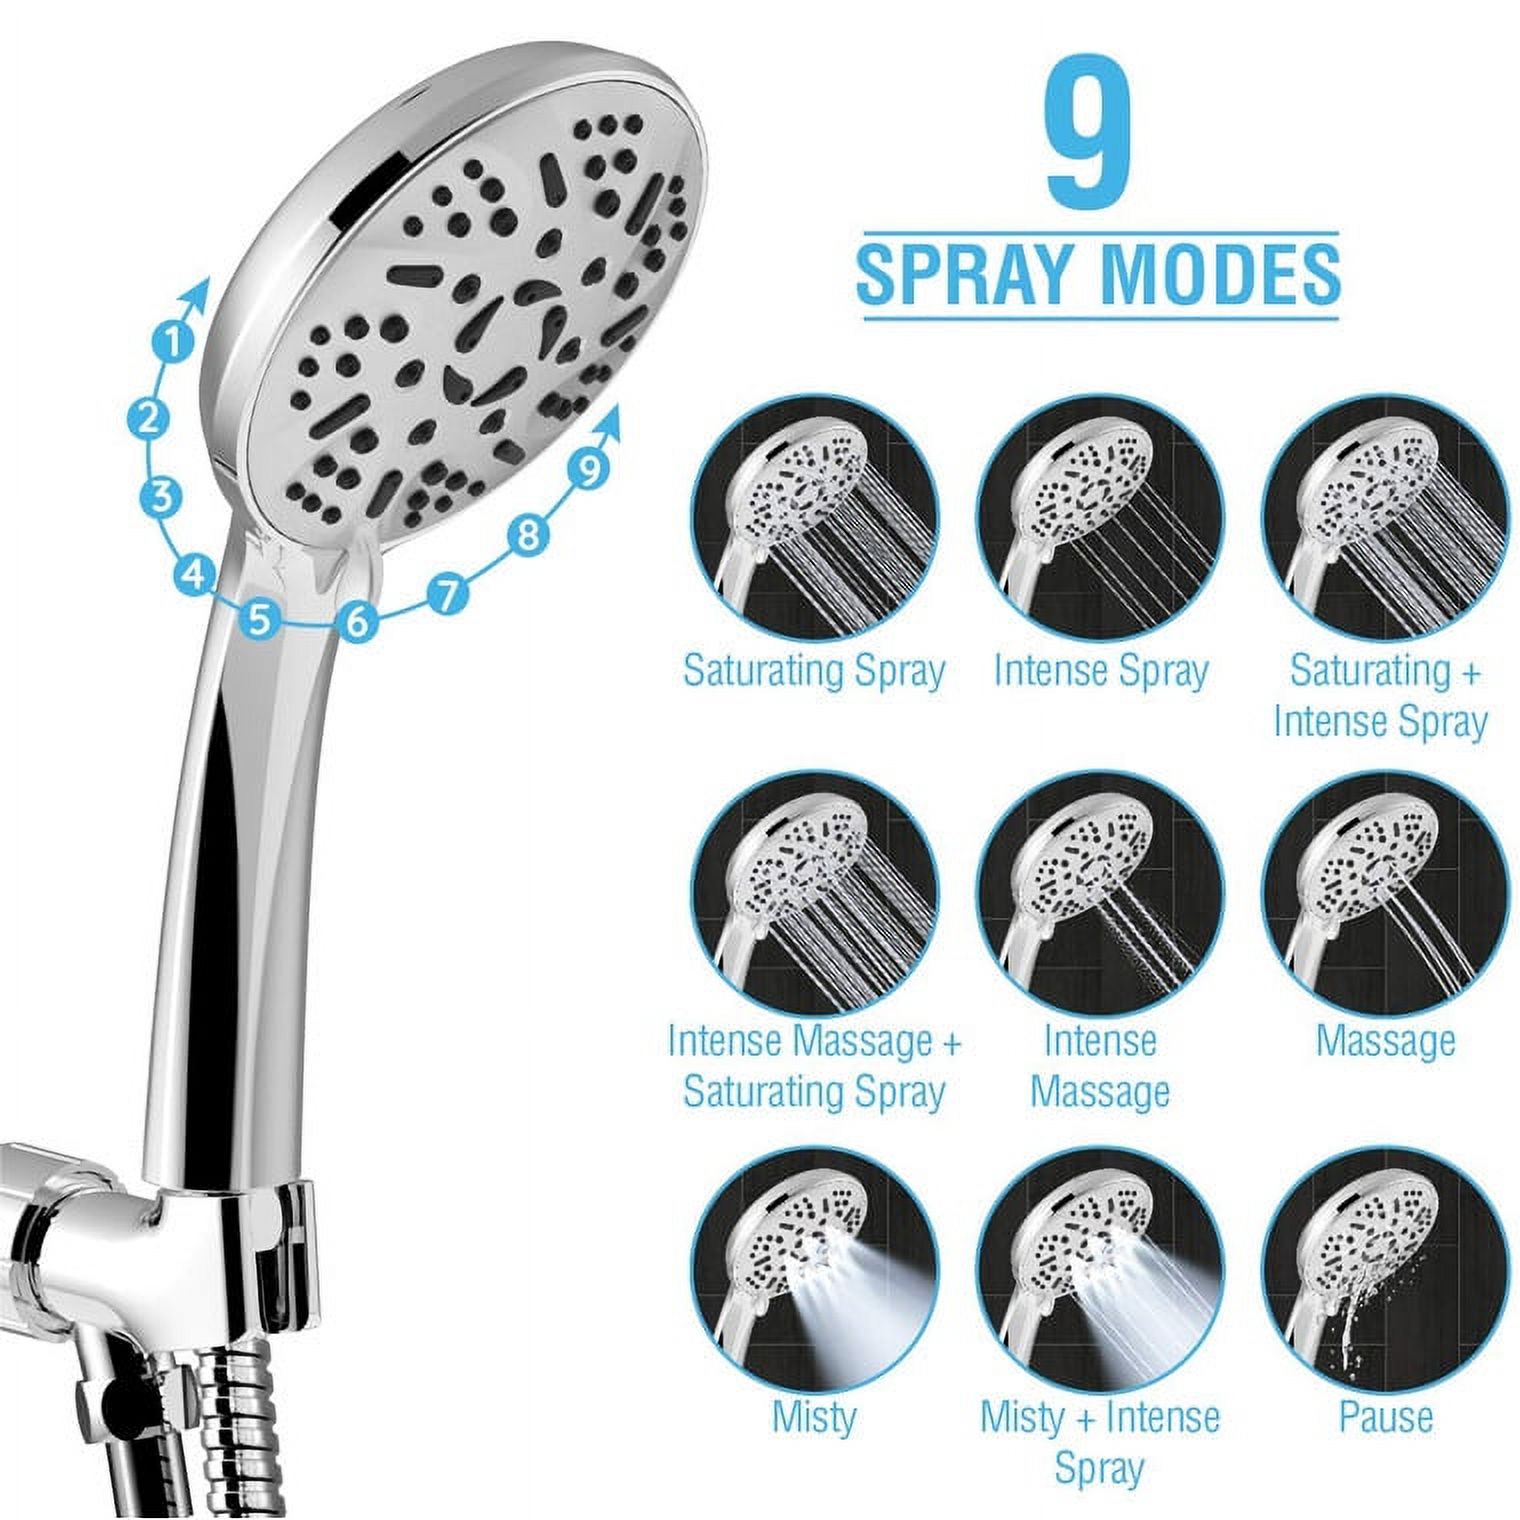 AQwzh High Pressure Handheld Shower Head – 9 Spray Modes with 60 Inch Hose (Chrome) - image 2 of 8